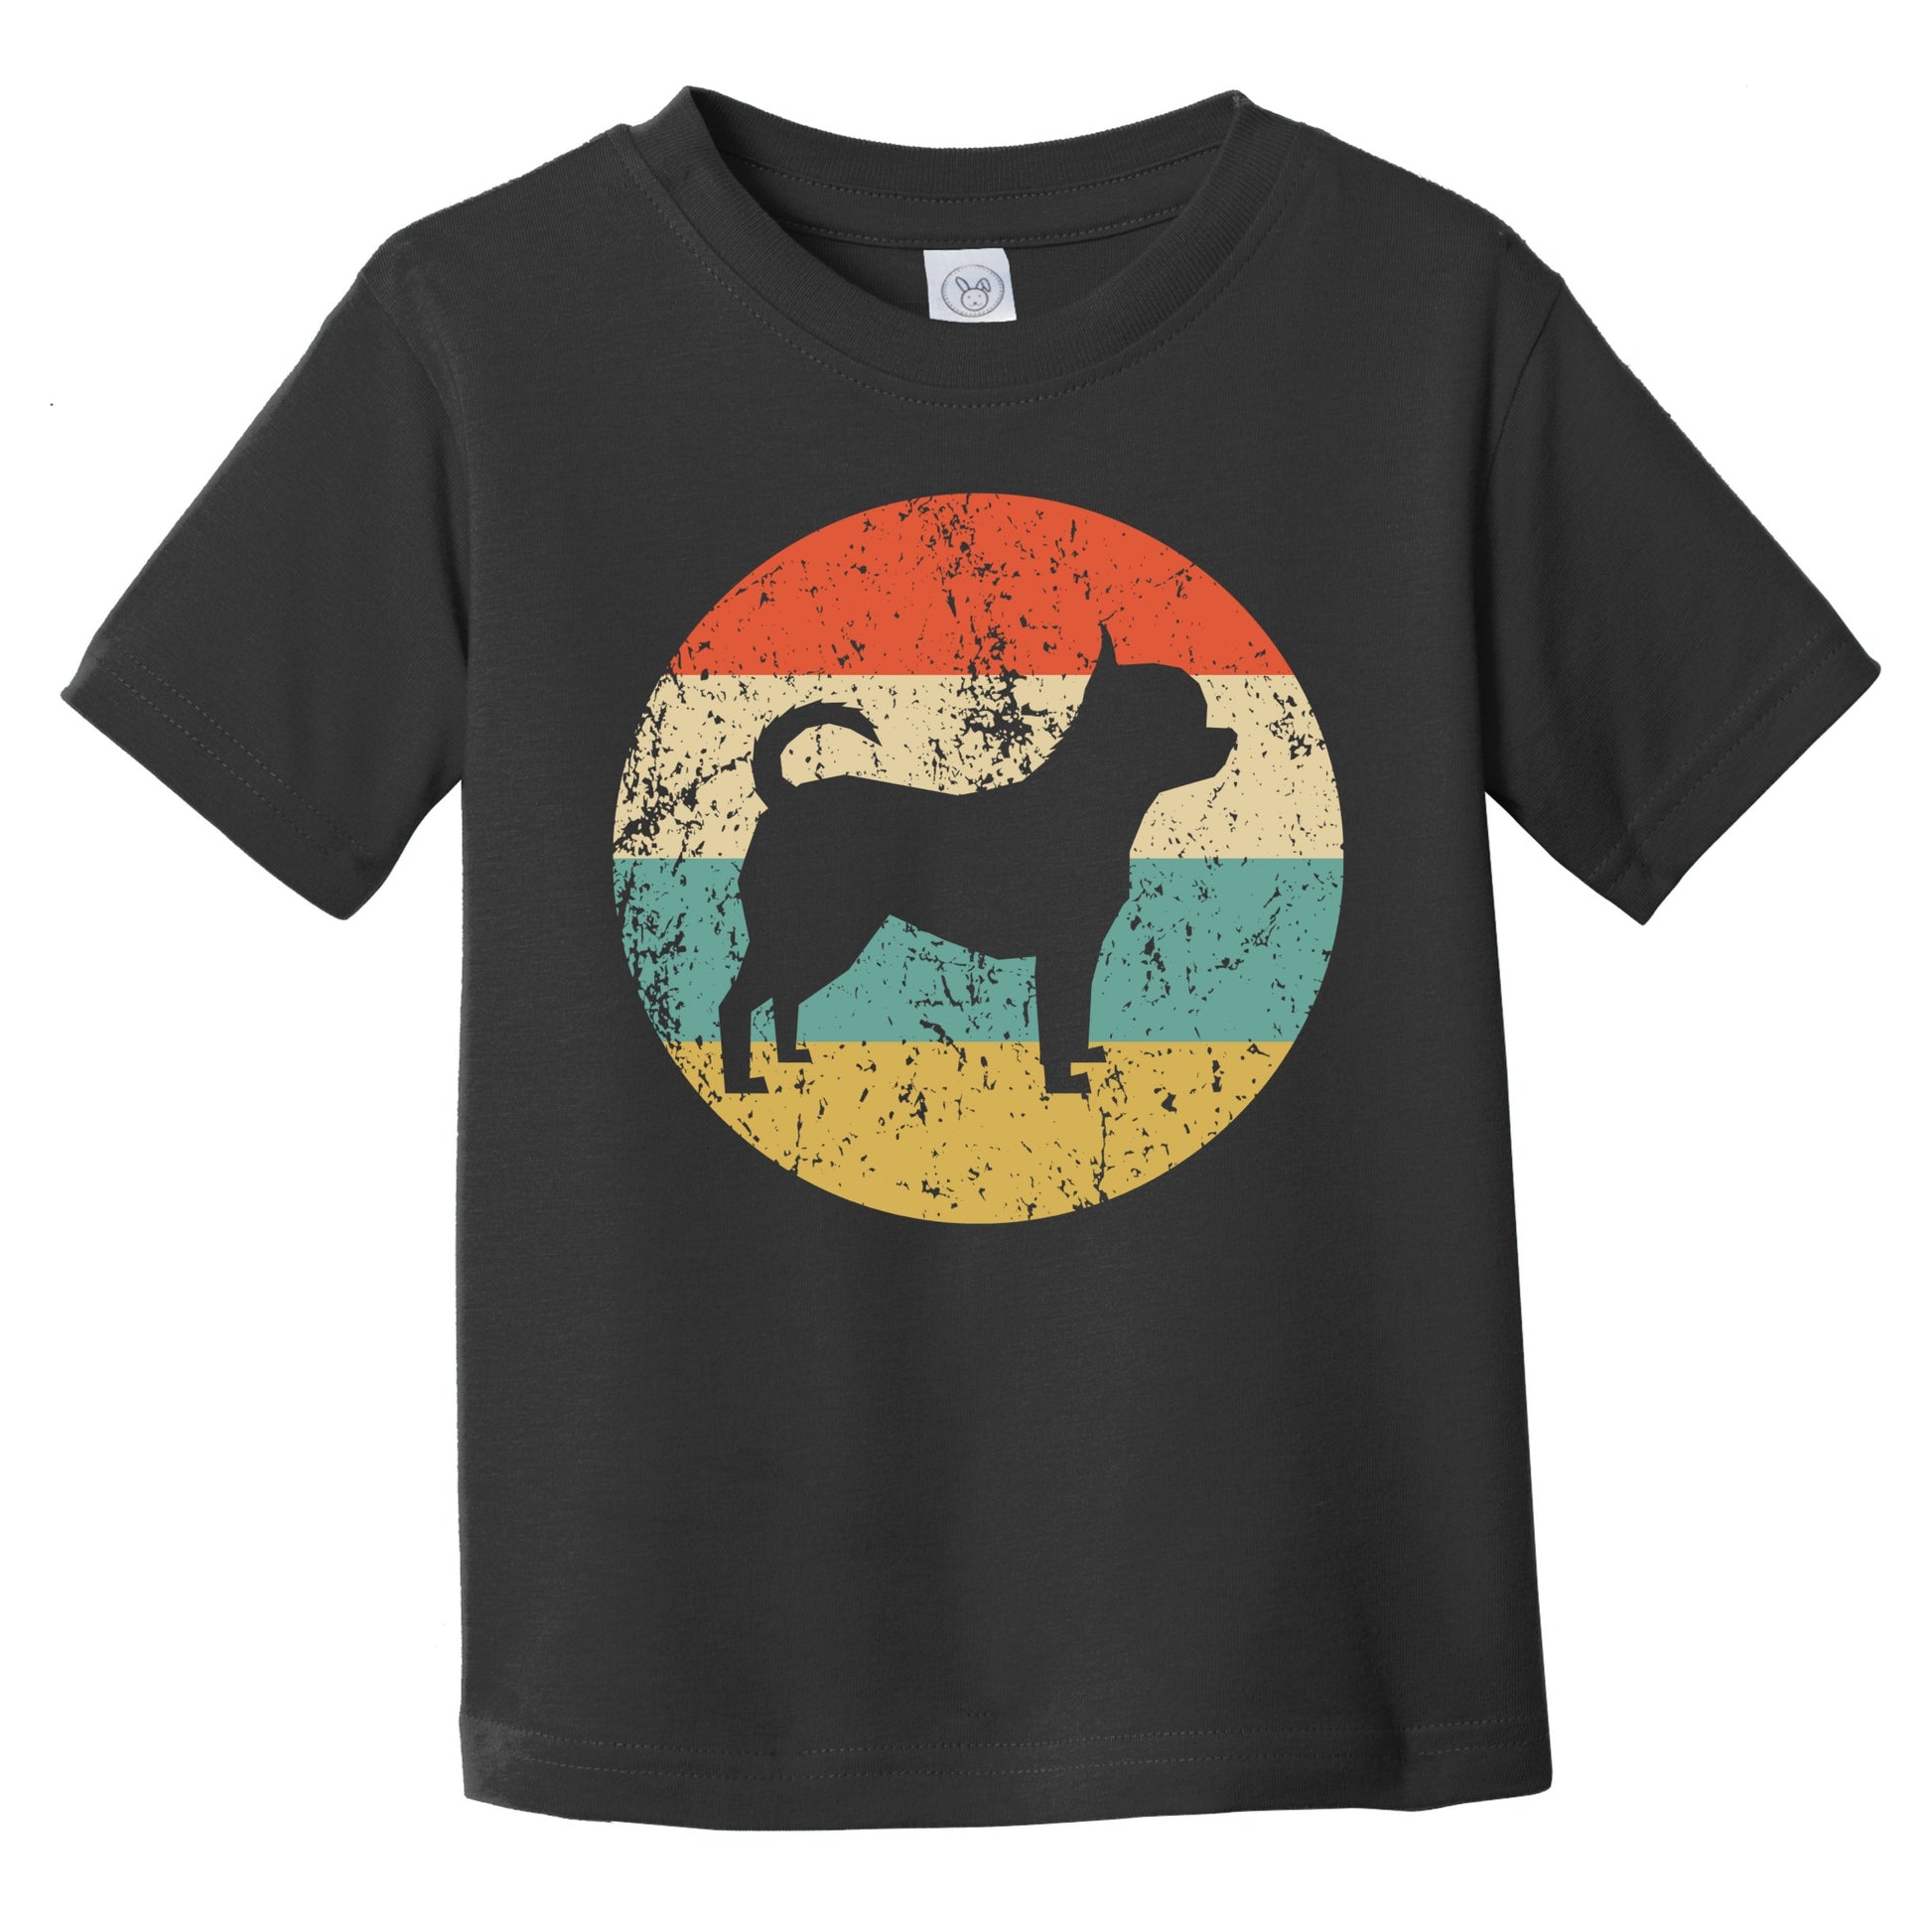 Retro Chihuahua Icon Dog Silhouette Infant Toddler T-Shirt